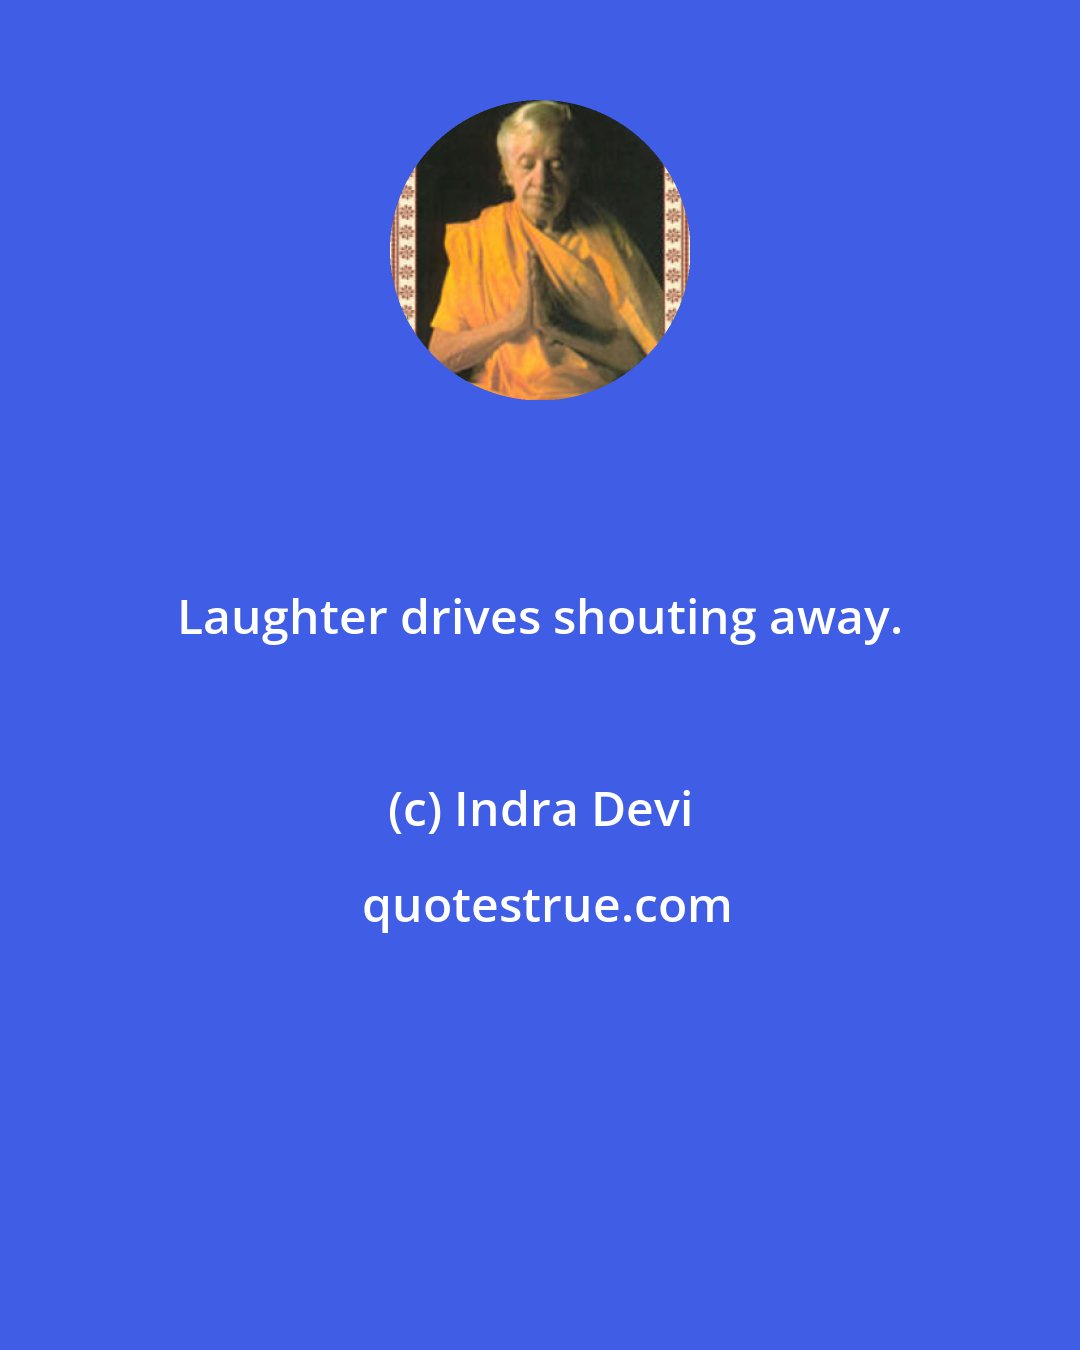 Indra Devi: Laughter drives shouting away.